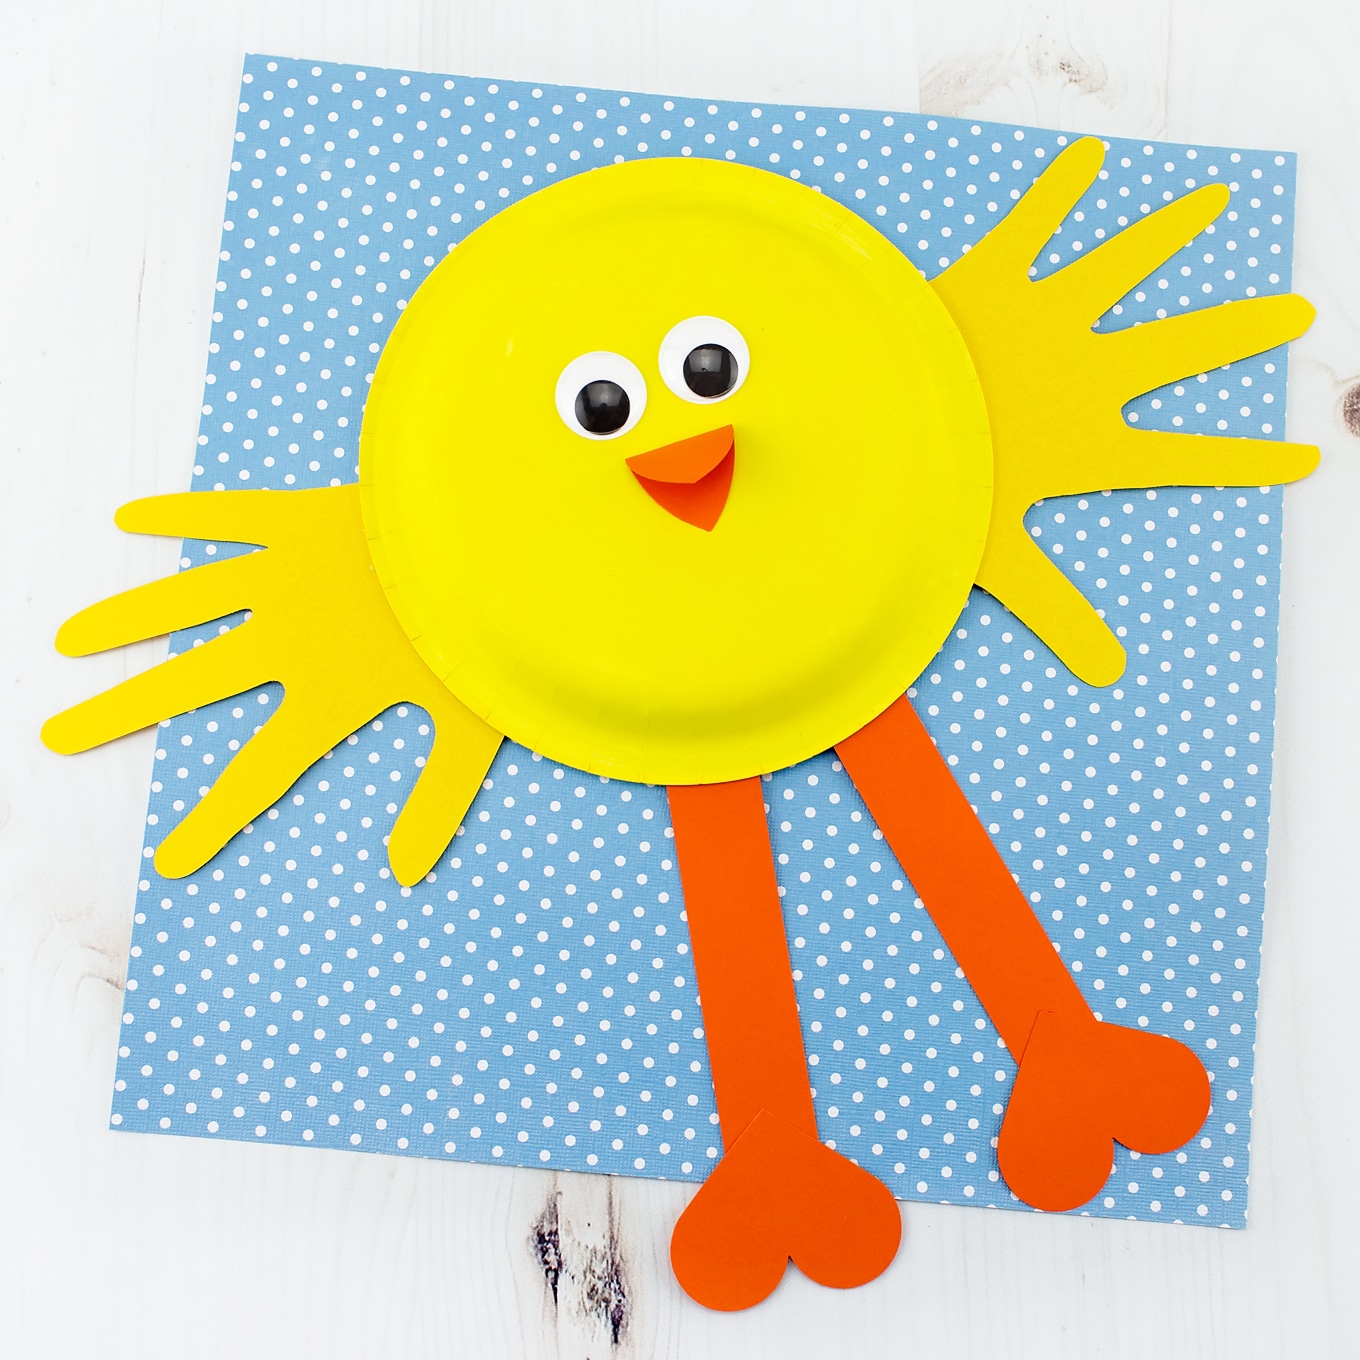 Easter crafts ideas for kids